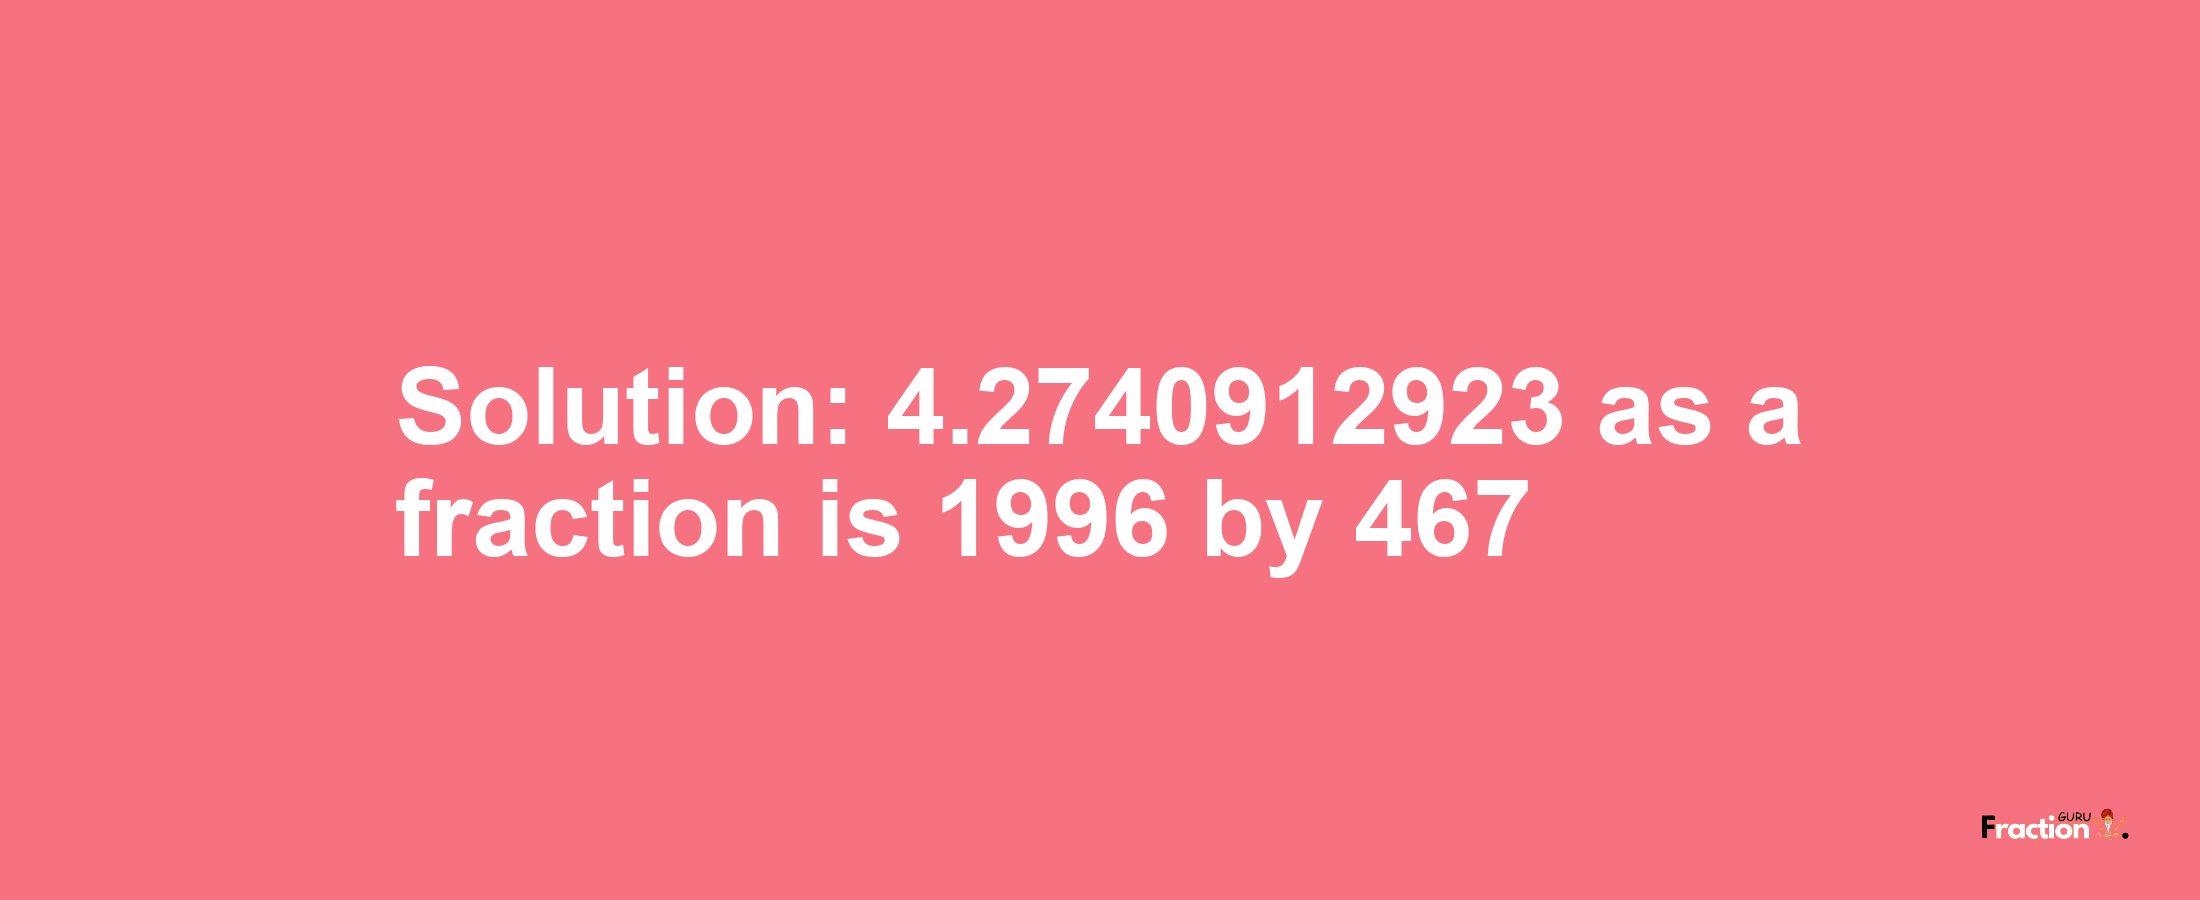 Solution:4.2740912923 as a fraction is 1996/467